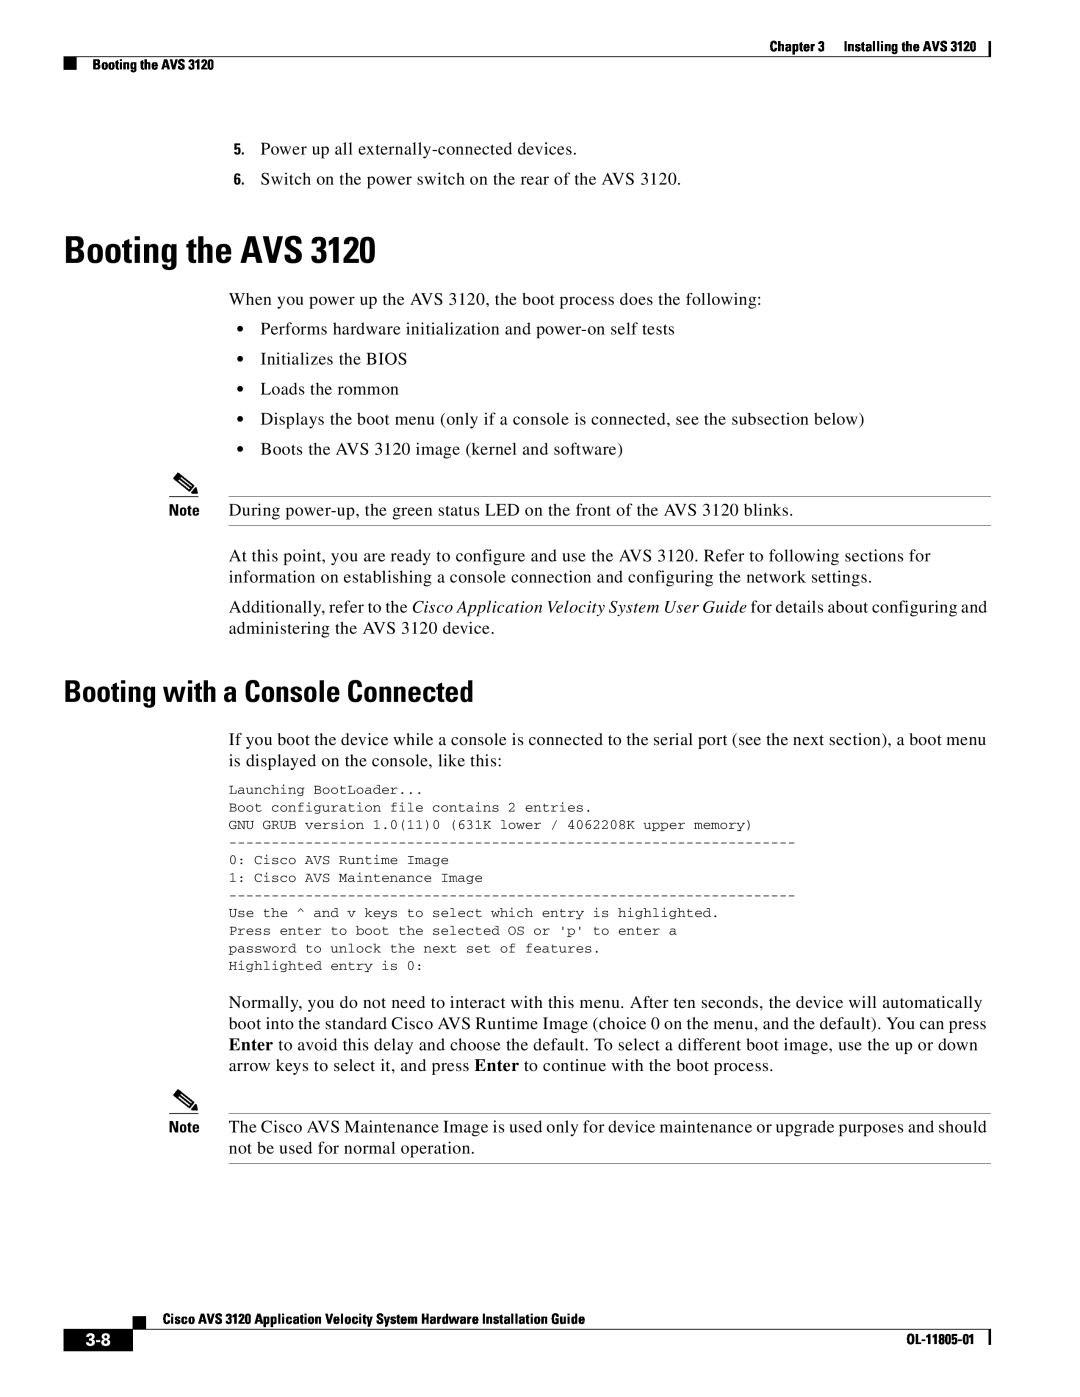 Cisco Systems AVS 3120 installation instructions Booting the AVS, Booting with a Console Connected 